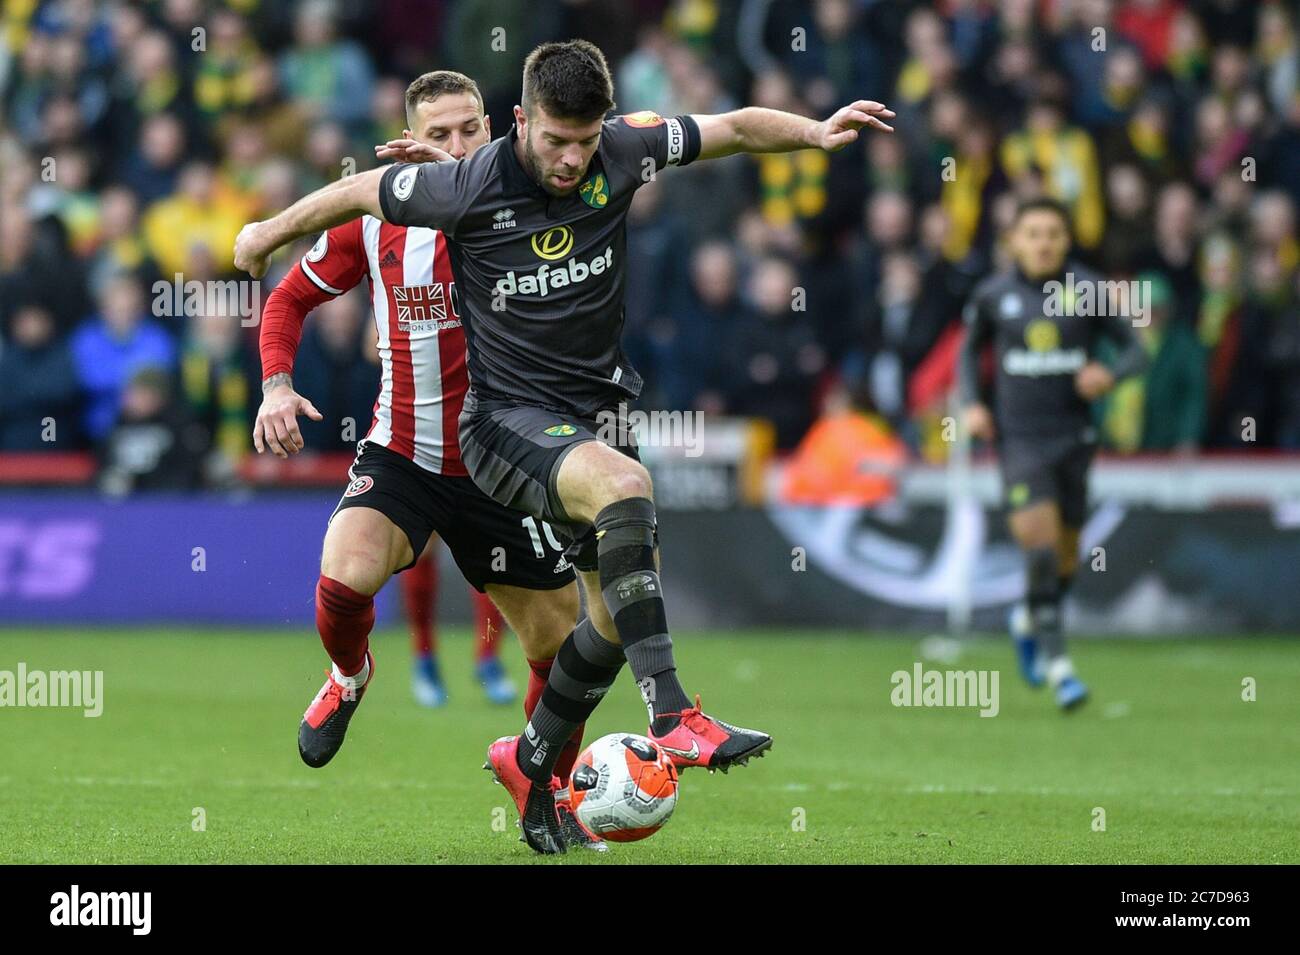 7th March 2020, Bramall Lane, Sheffield, England; Premier League, Sheffield United v Norwich City : Grant Hanley (5) of Norwich City with the ball Stock Photo